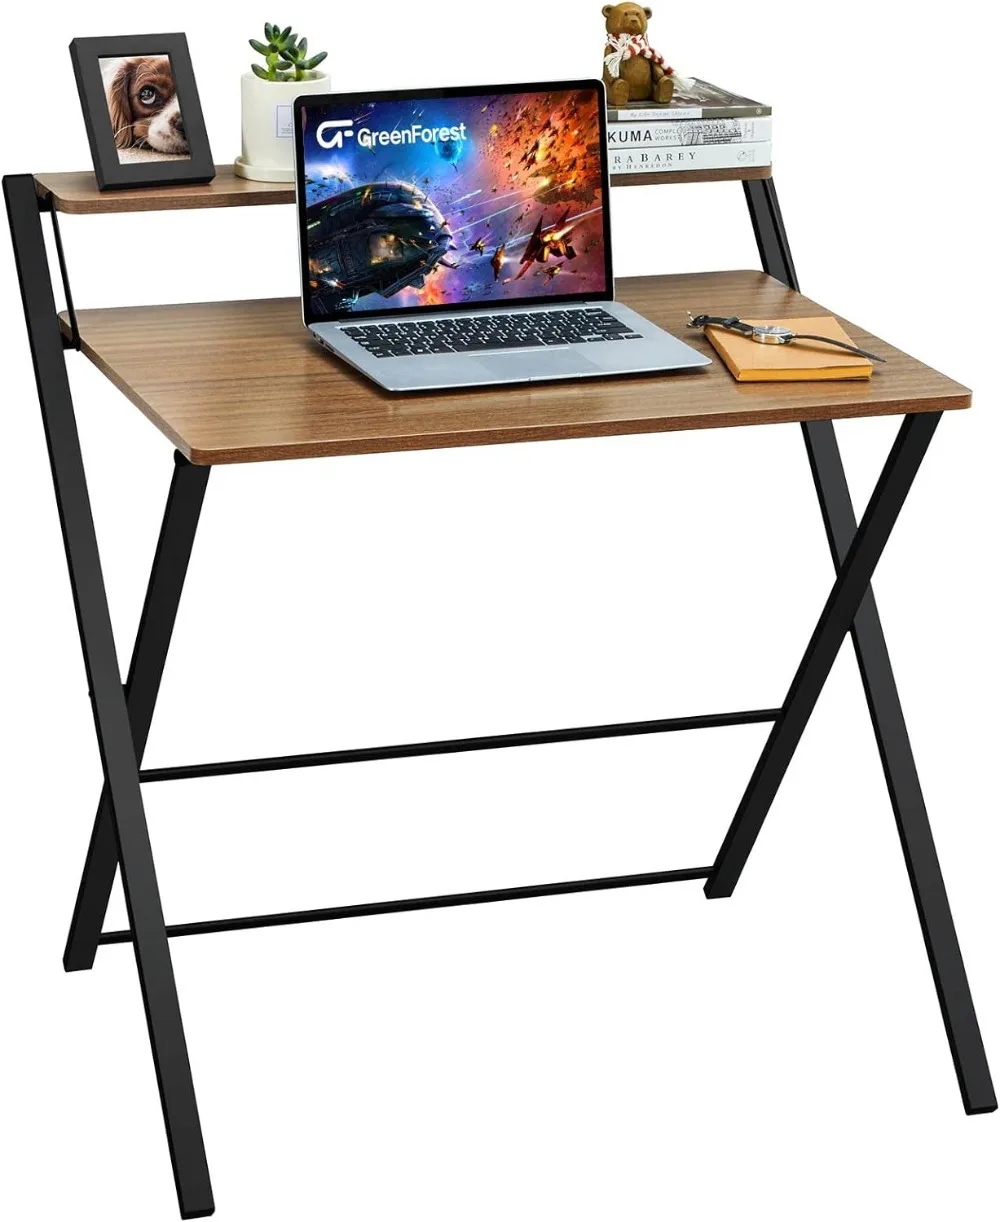 GreenForest Small Folding Desk No Assembly Required, Fully Unfold 27.3 x 22 inch 2-Tier Computer Desk for 6 5 inch aa065vb01 ccfl tft repair lcd screen display panel fully tested